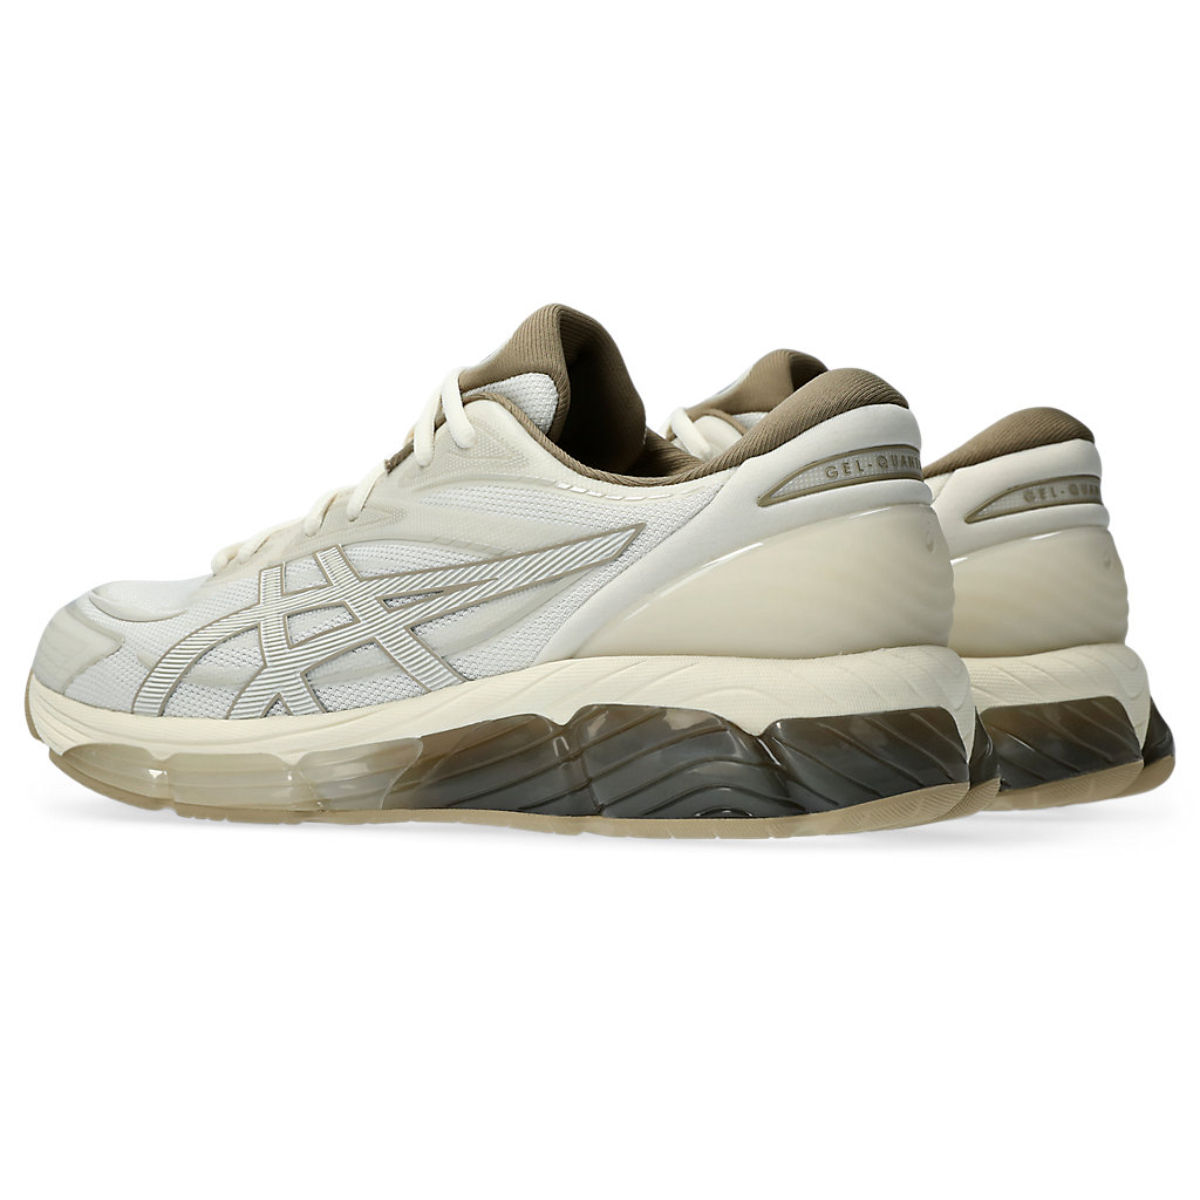 Buy ASICS Men's White/Midnight Sneakers - 6 UK (40 EU) (7 US) (1191A165) at  Amazon.in